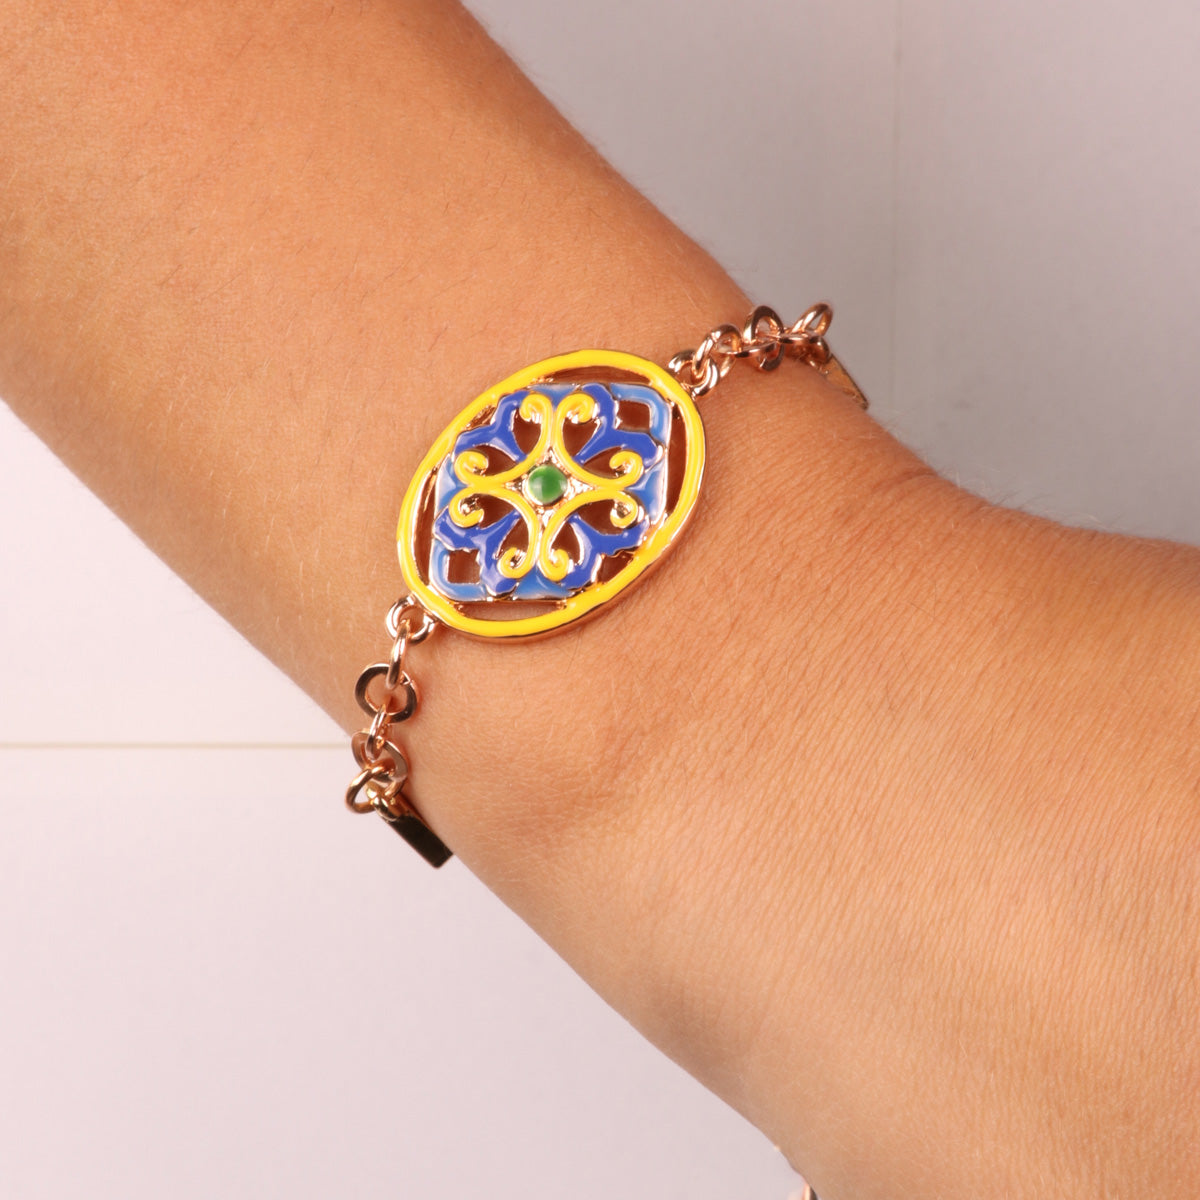 Metal bracelet white crystals with central detail in ever -glazed blue and yellow flower